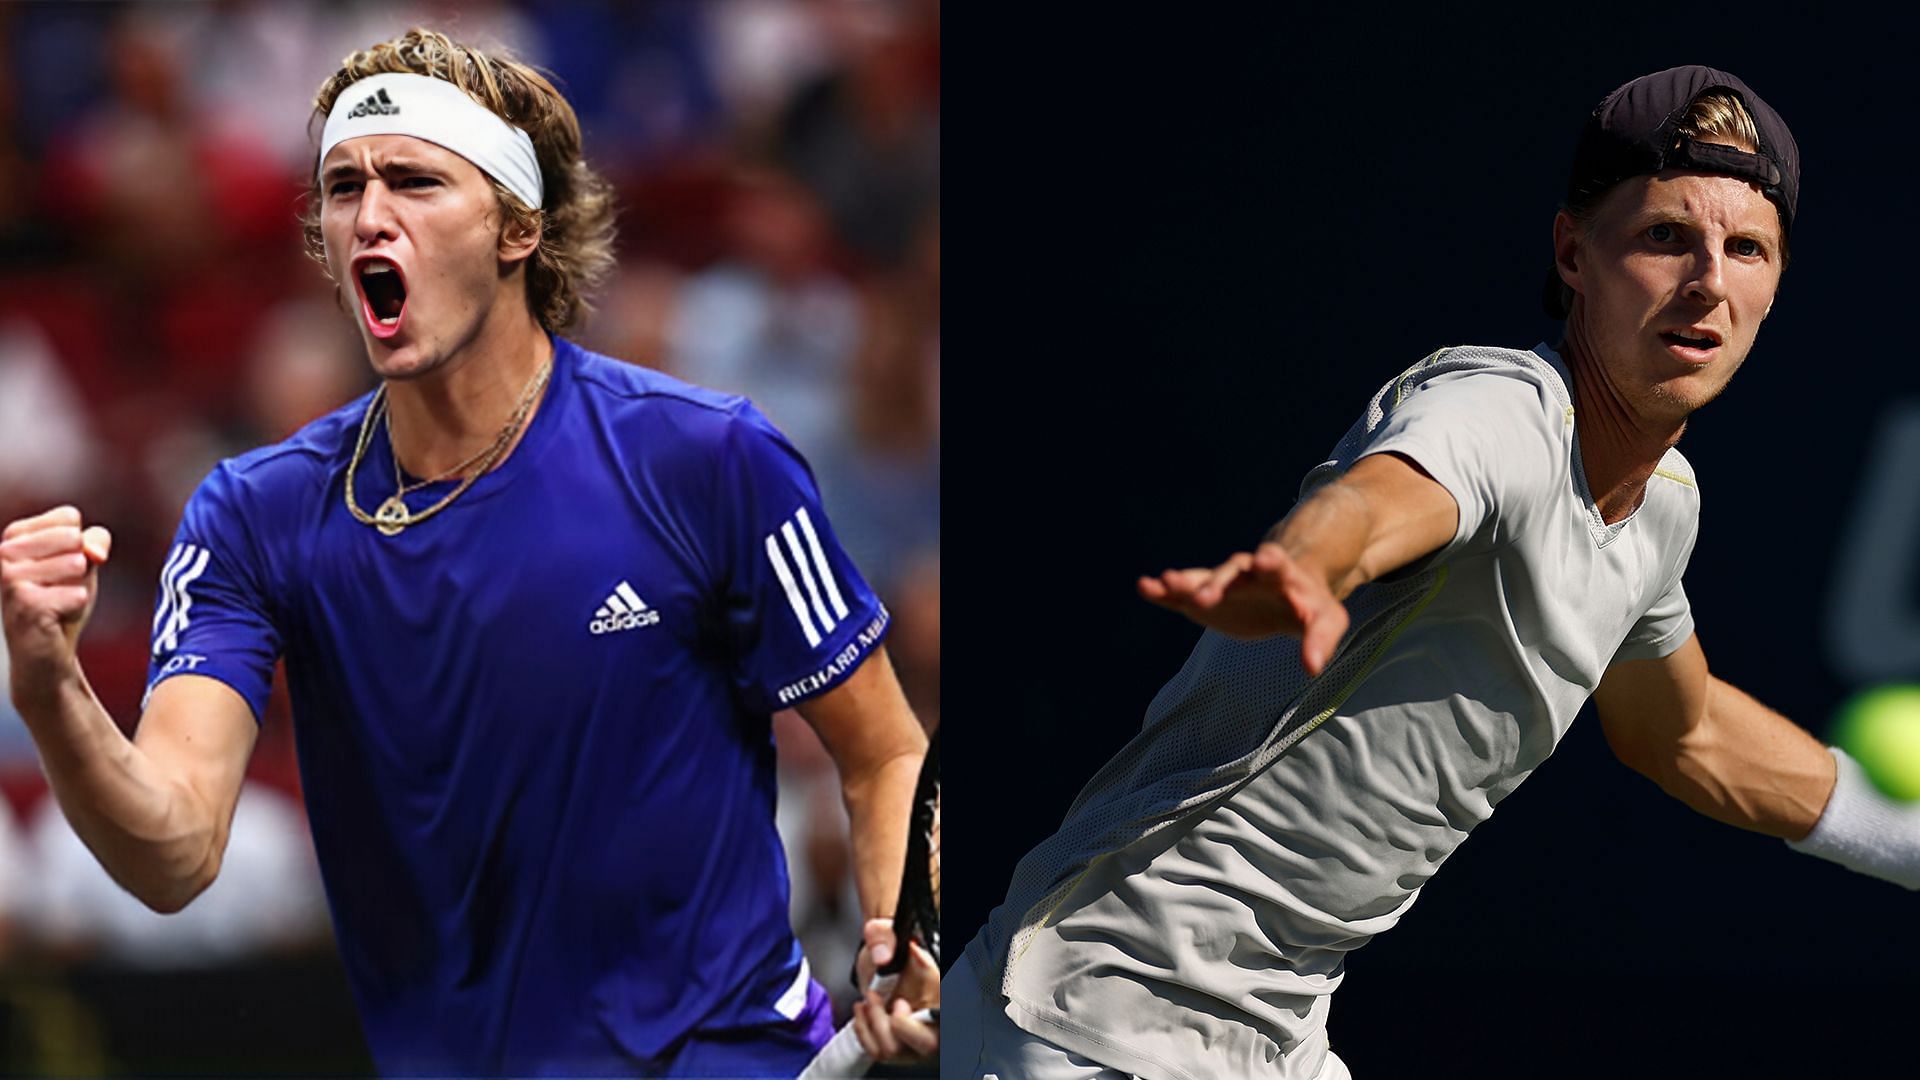 Alexander Zverev vs Gijs Brouwer is one of the first-round matches at the 2023 Wimbledon.